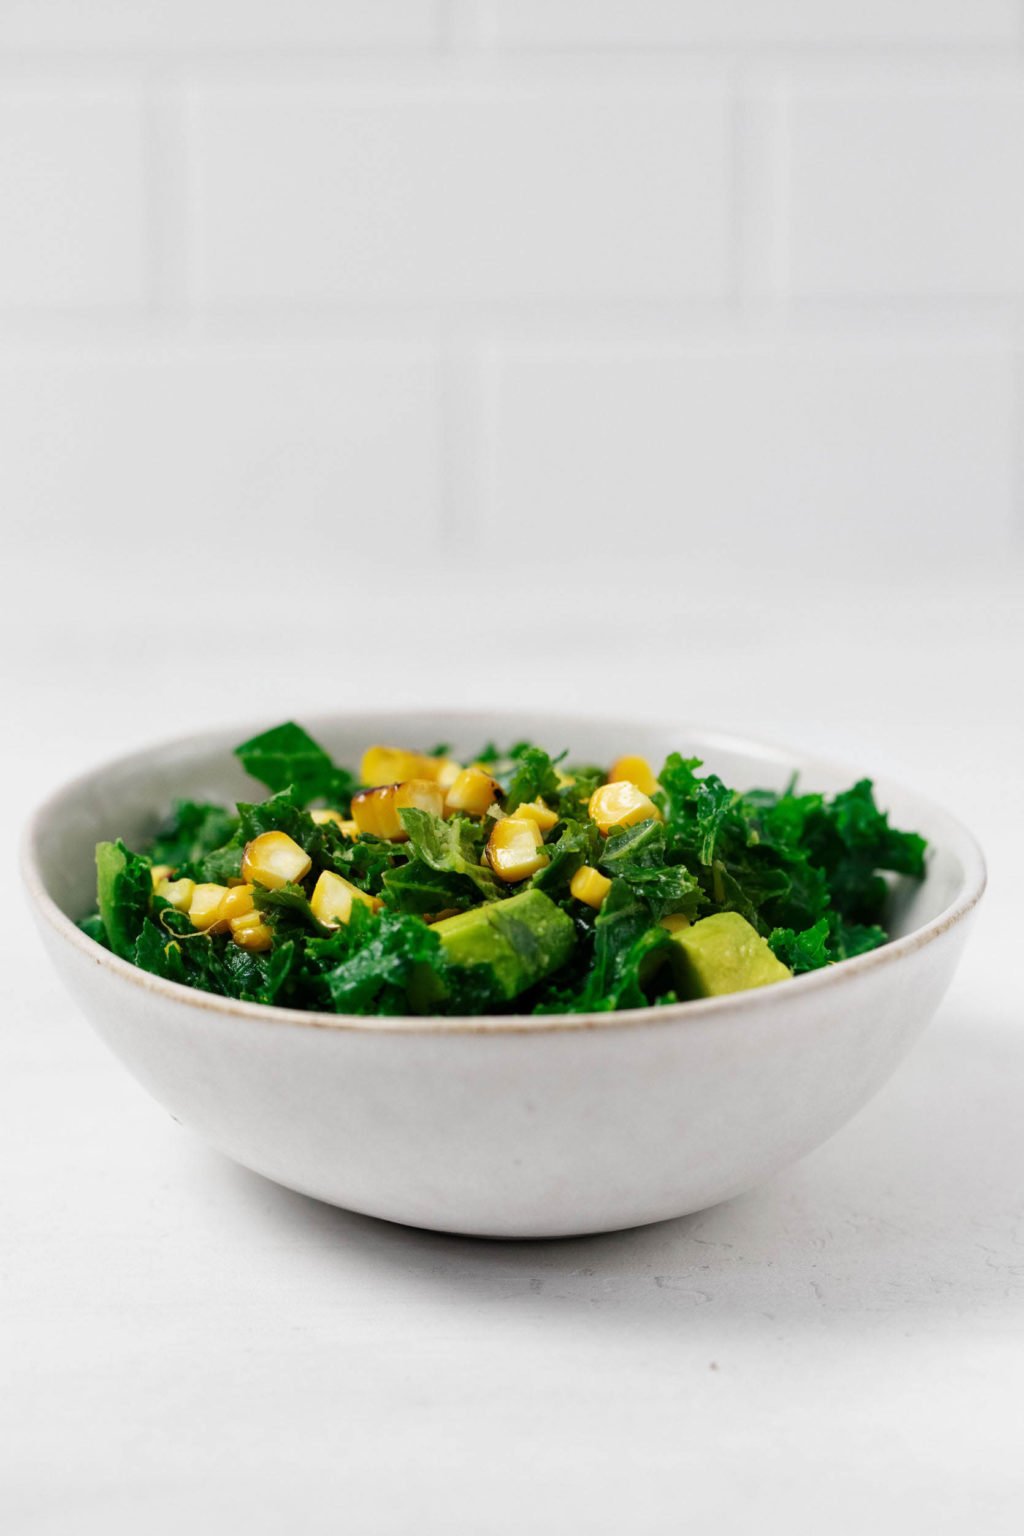 A bowl of bright green kale and other vegetables rests on a white surface, with a white tiled wall in the background.